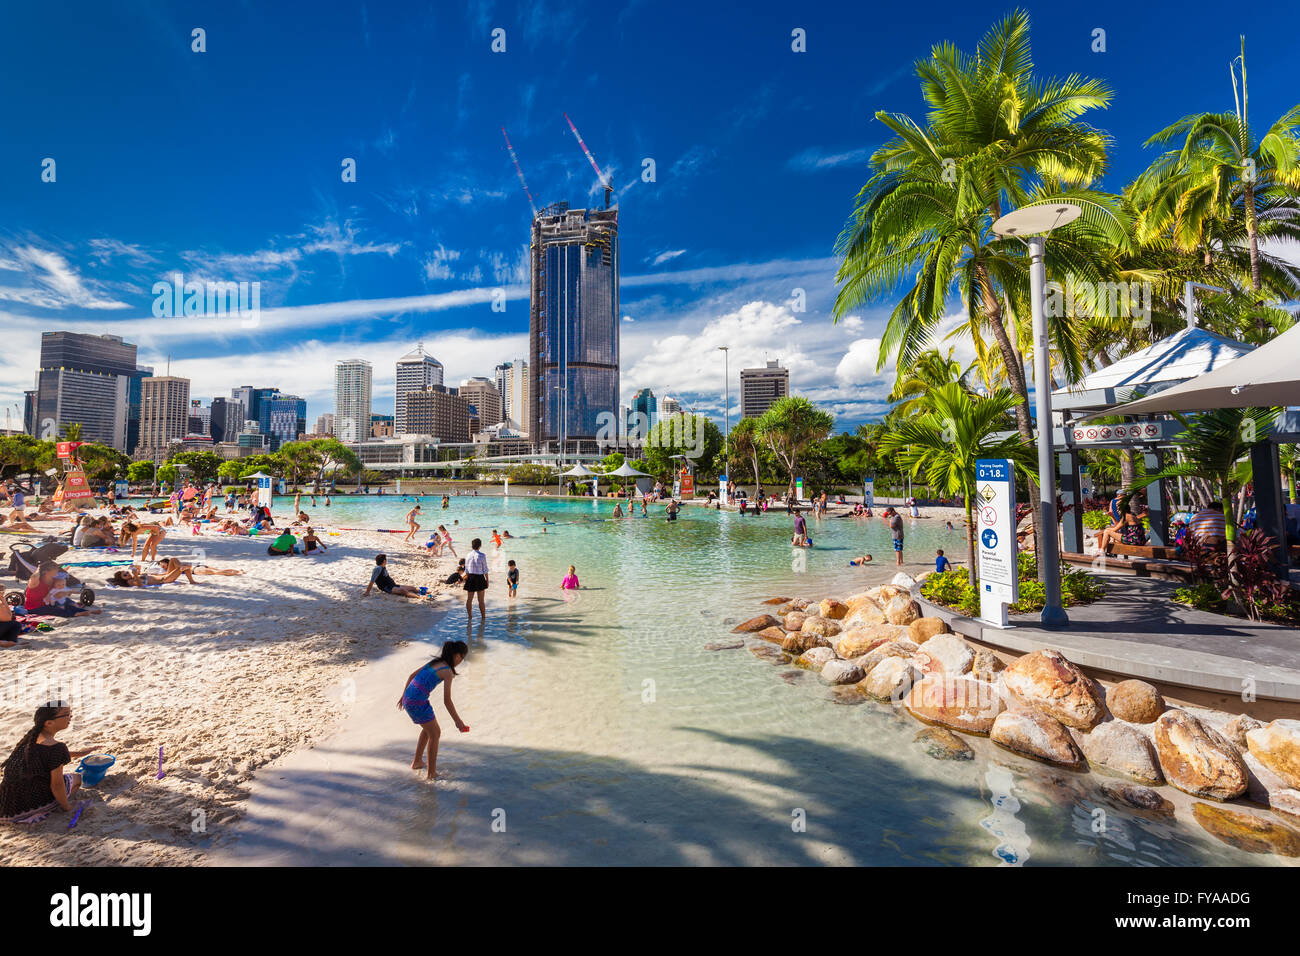 BRISBANE, AUS - APRIL 17 2016: Streets Beach in South Bank Parkland. It's inner-city man-made beach next to city center. Stock Photo